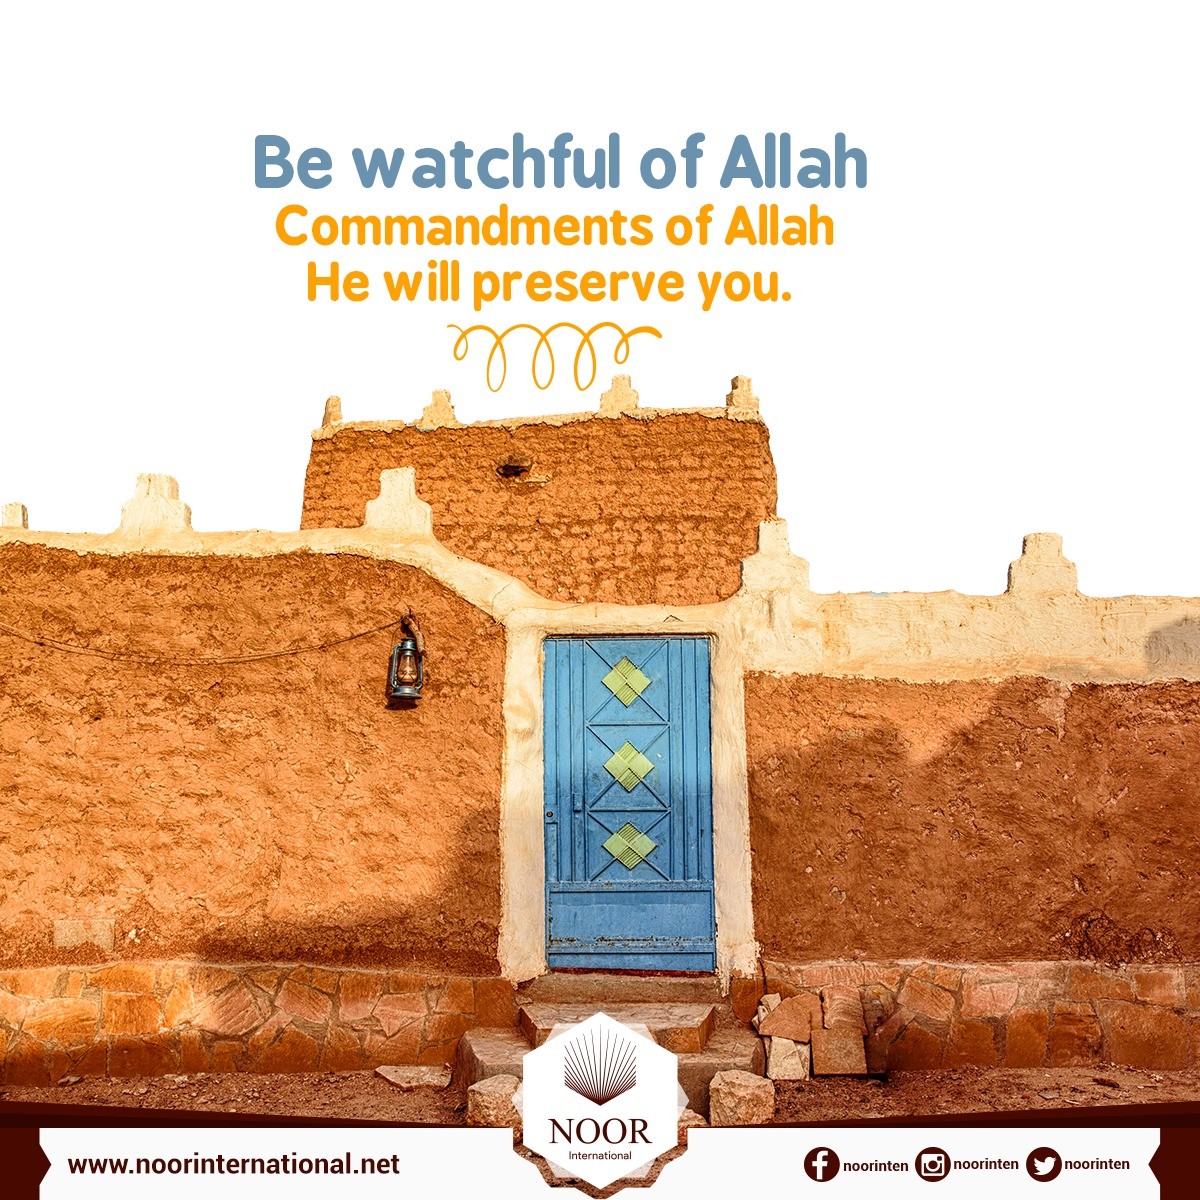 Be watchful of Allah (Commandments of Allah), He will preserve you.